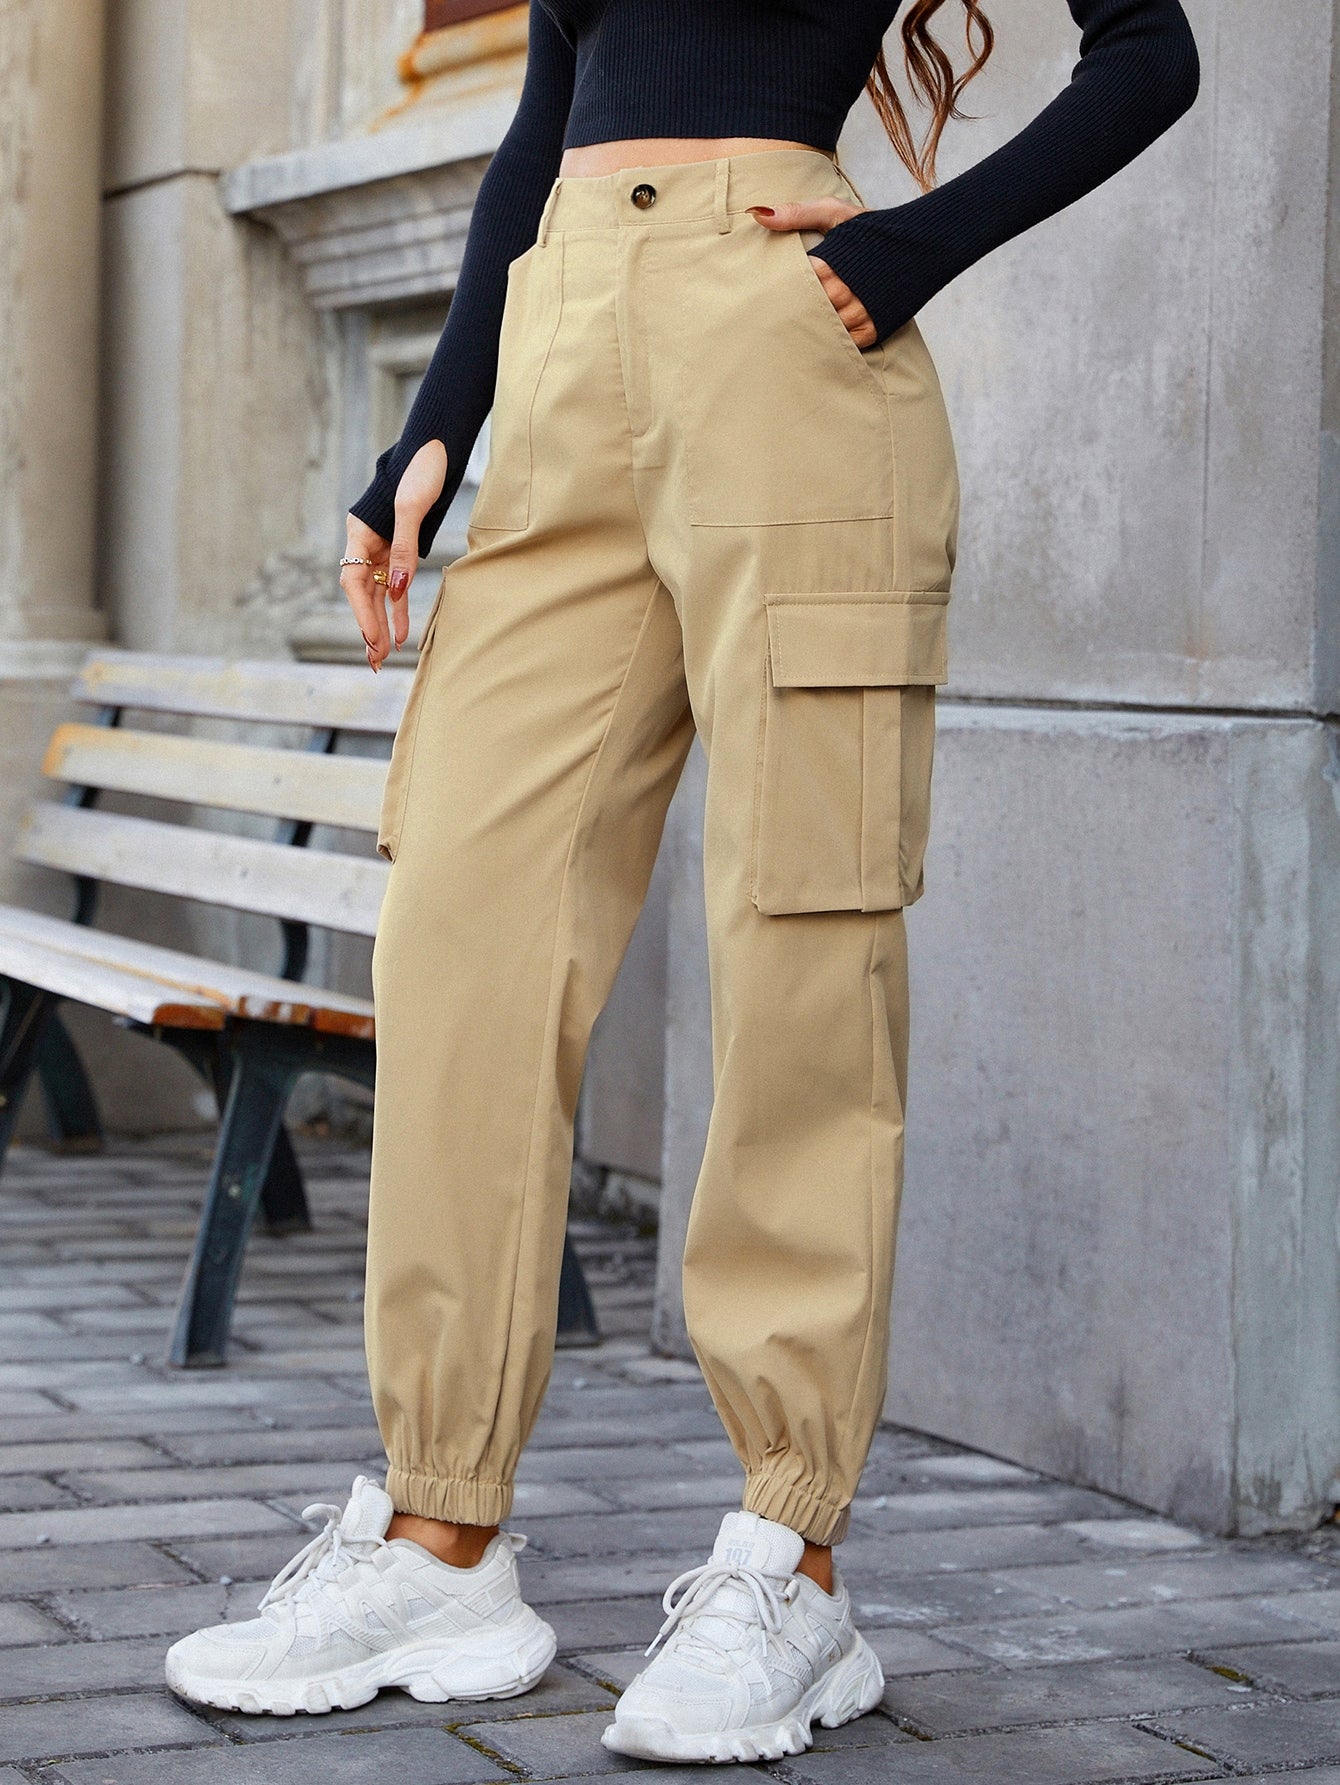  Women's Pants Pants for Women Flap Pocket Side Drawstring Waist  Cargo Pants (Color : Apricot, Size : Large) : Clothing, Shoes & Jewelry